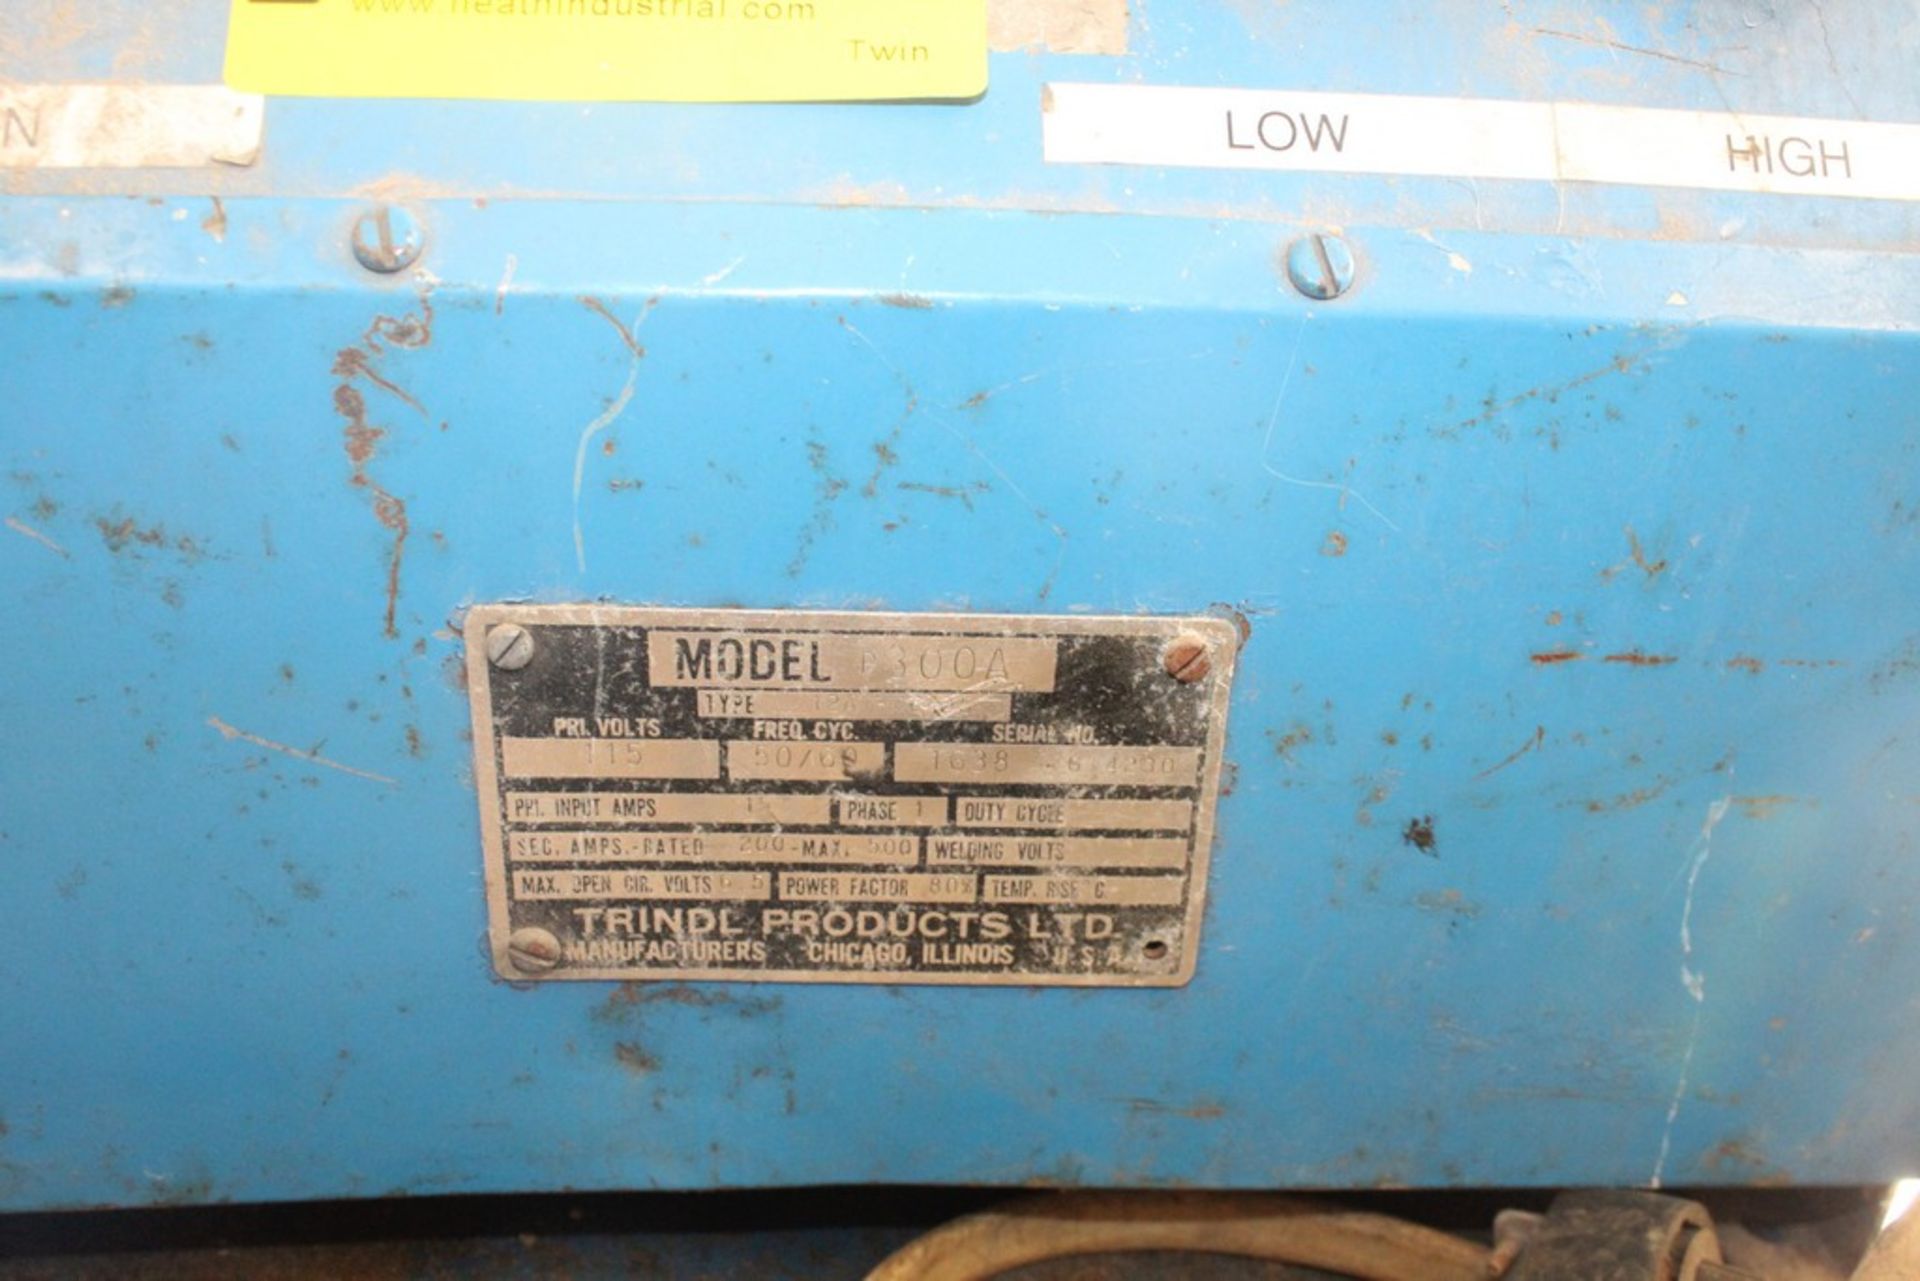 TRINDL MODEL P-300A PIPE THAWING MACHINE - Image 2 of 2